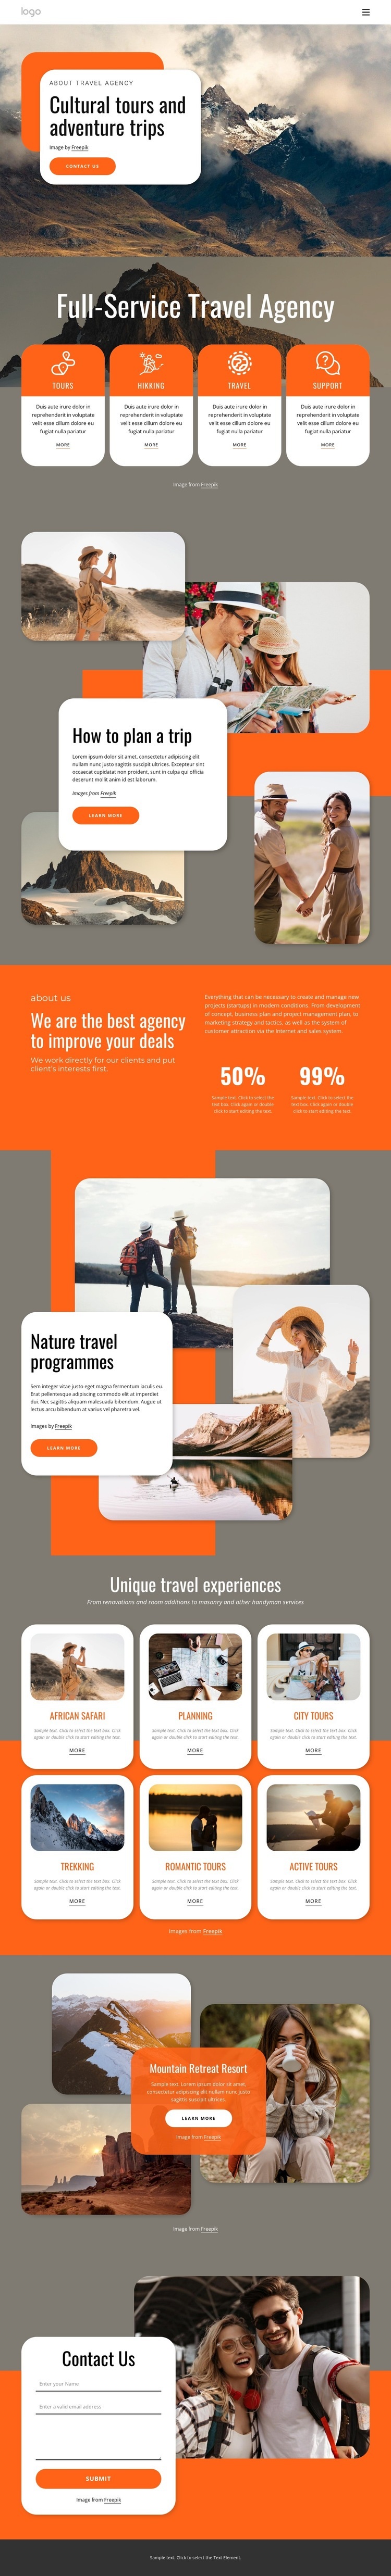 Group travel for all ages Squarespace Template Alternative